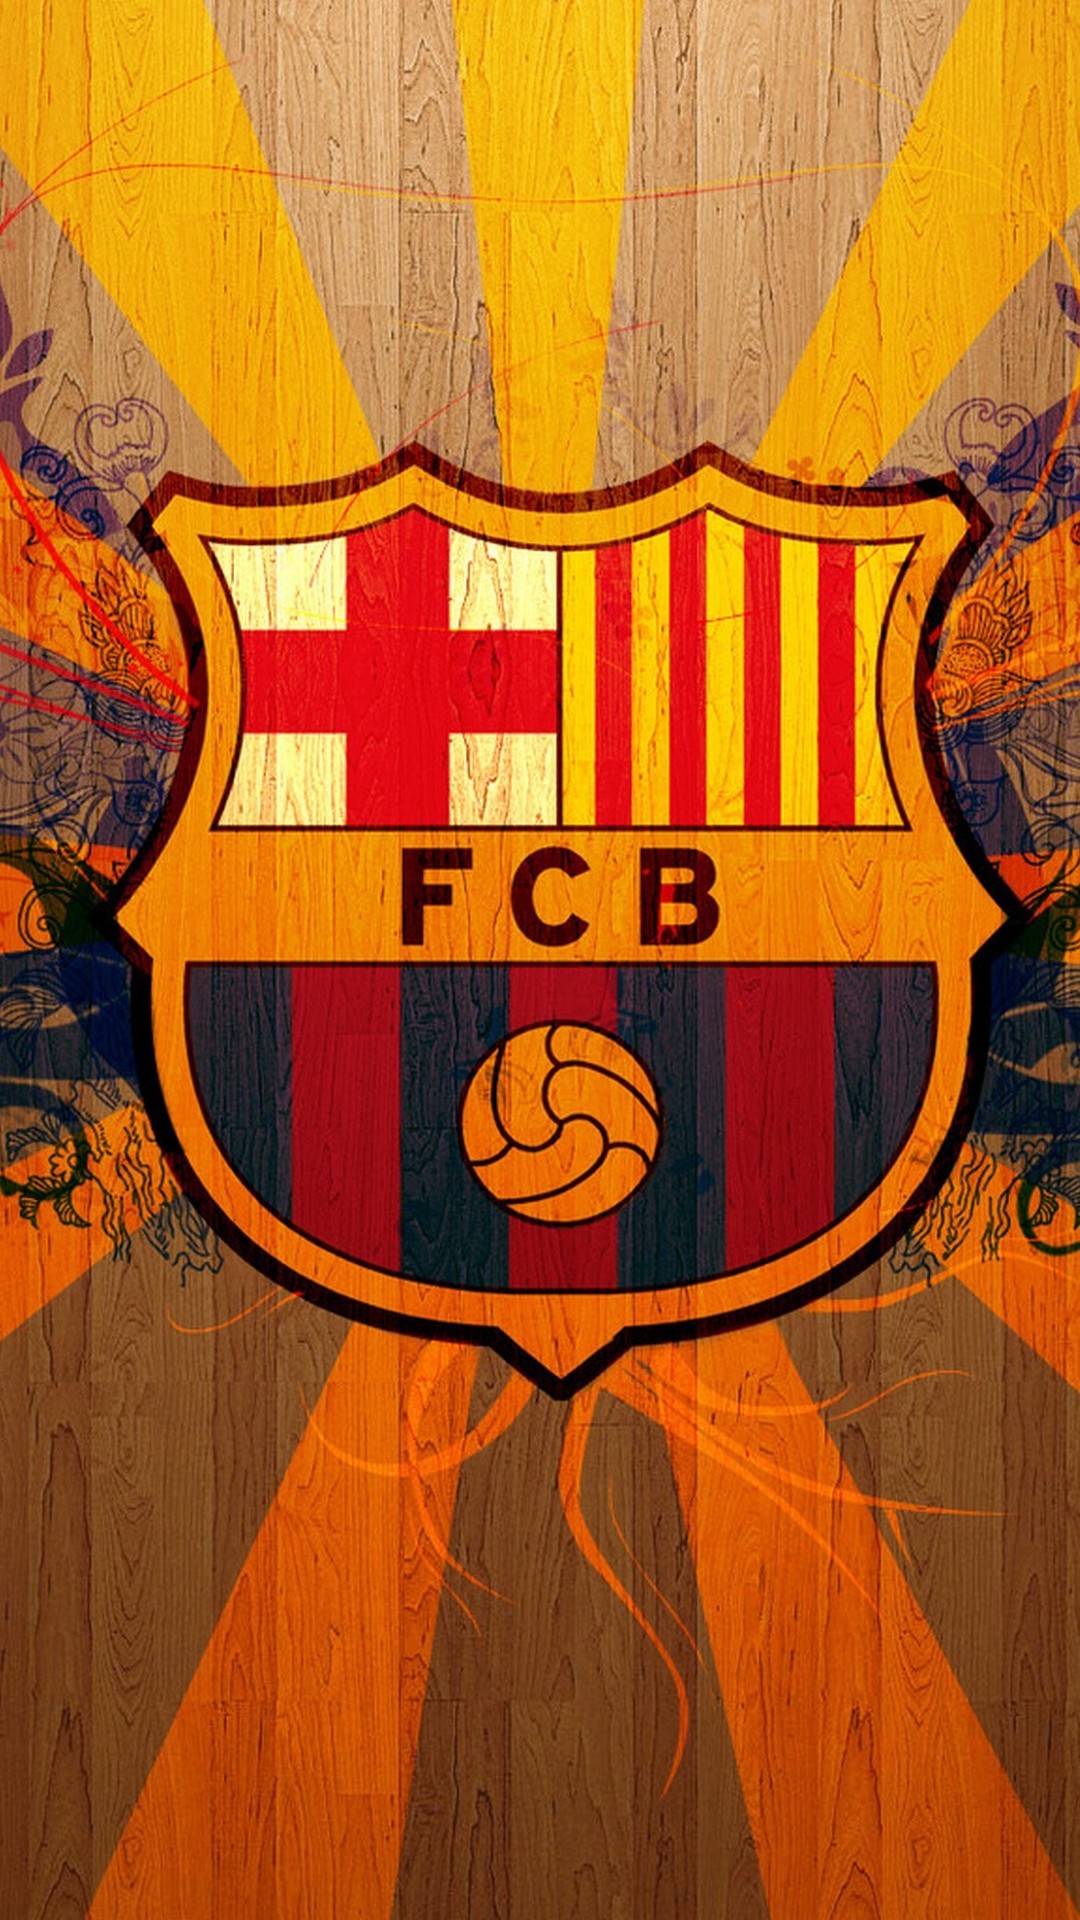 1080x1920 Wallpaper for galaxy s4 with FC Barcelona logo in  resolution